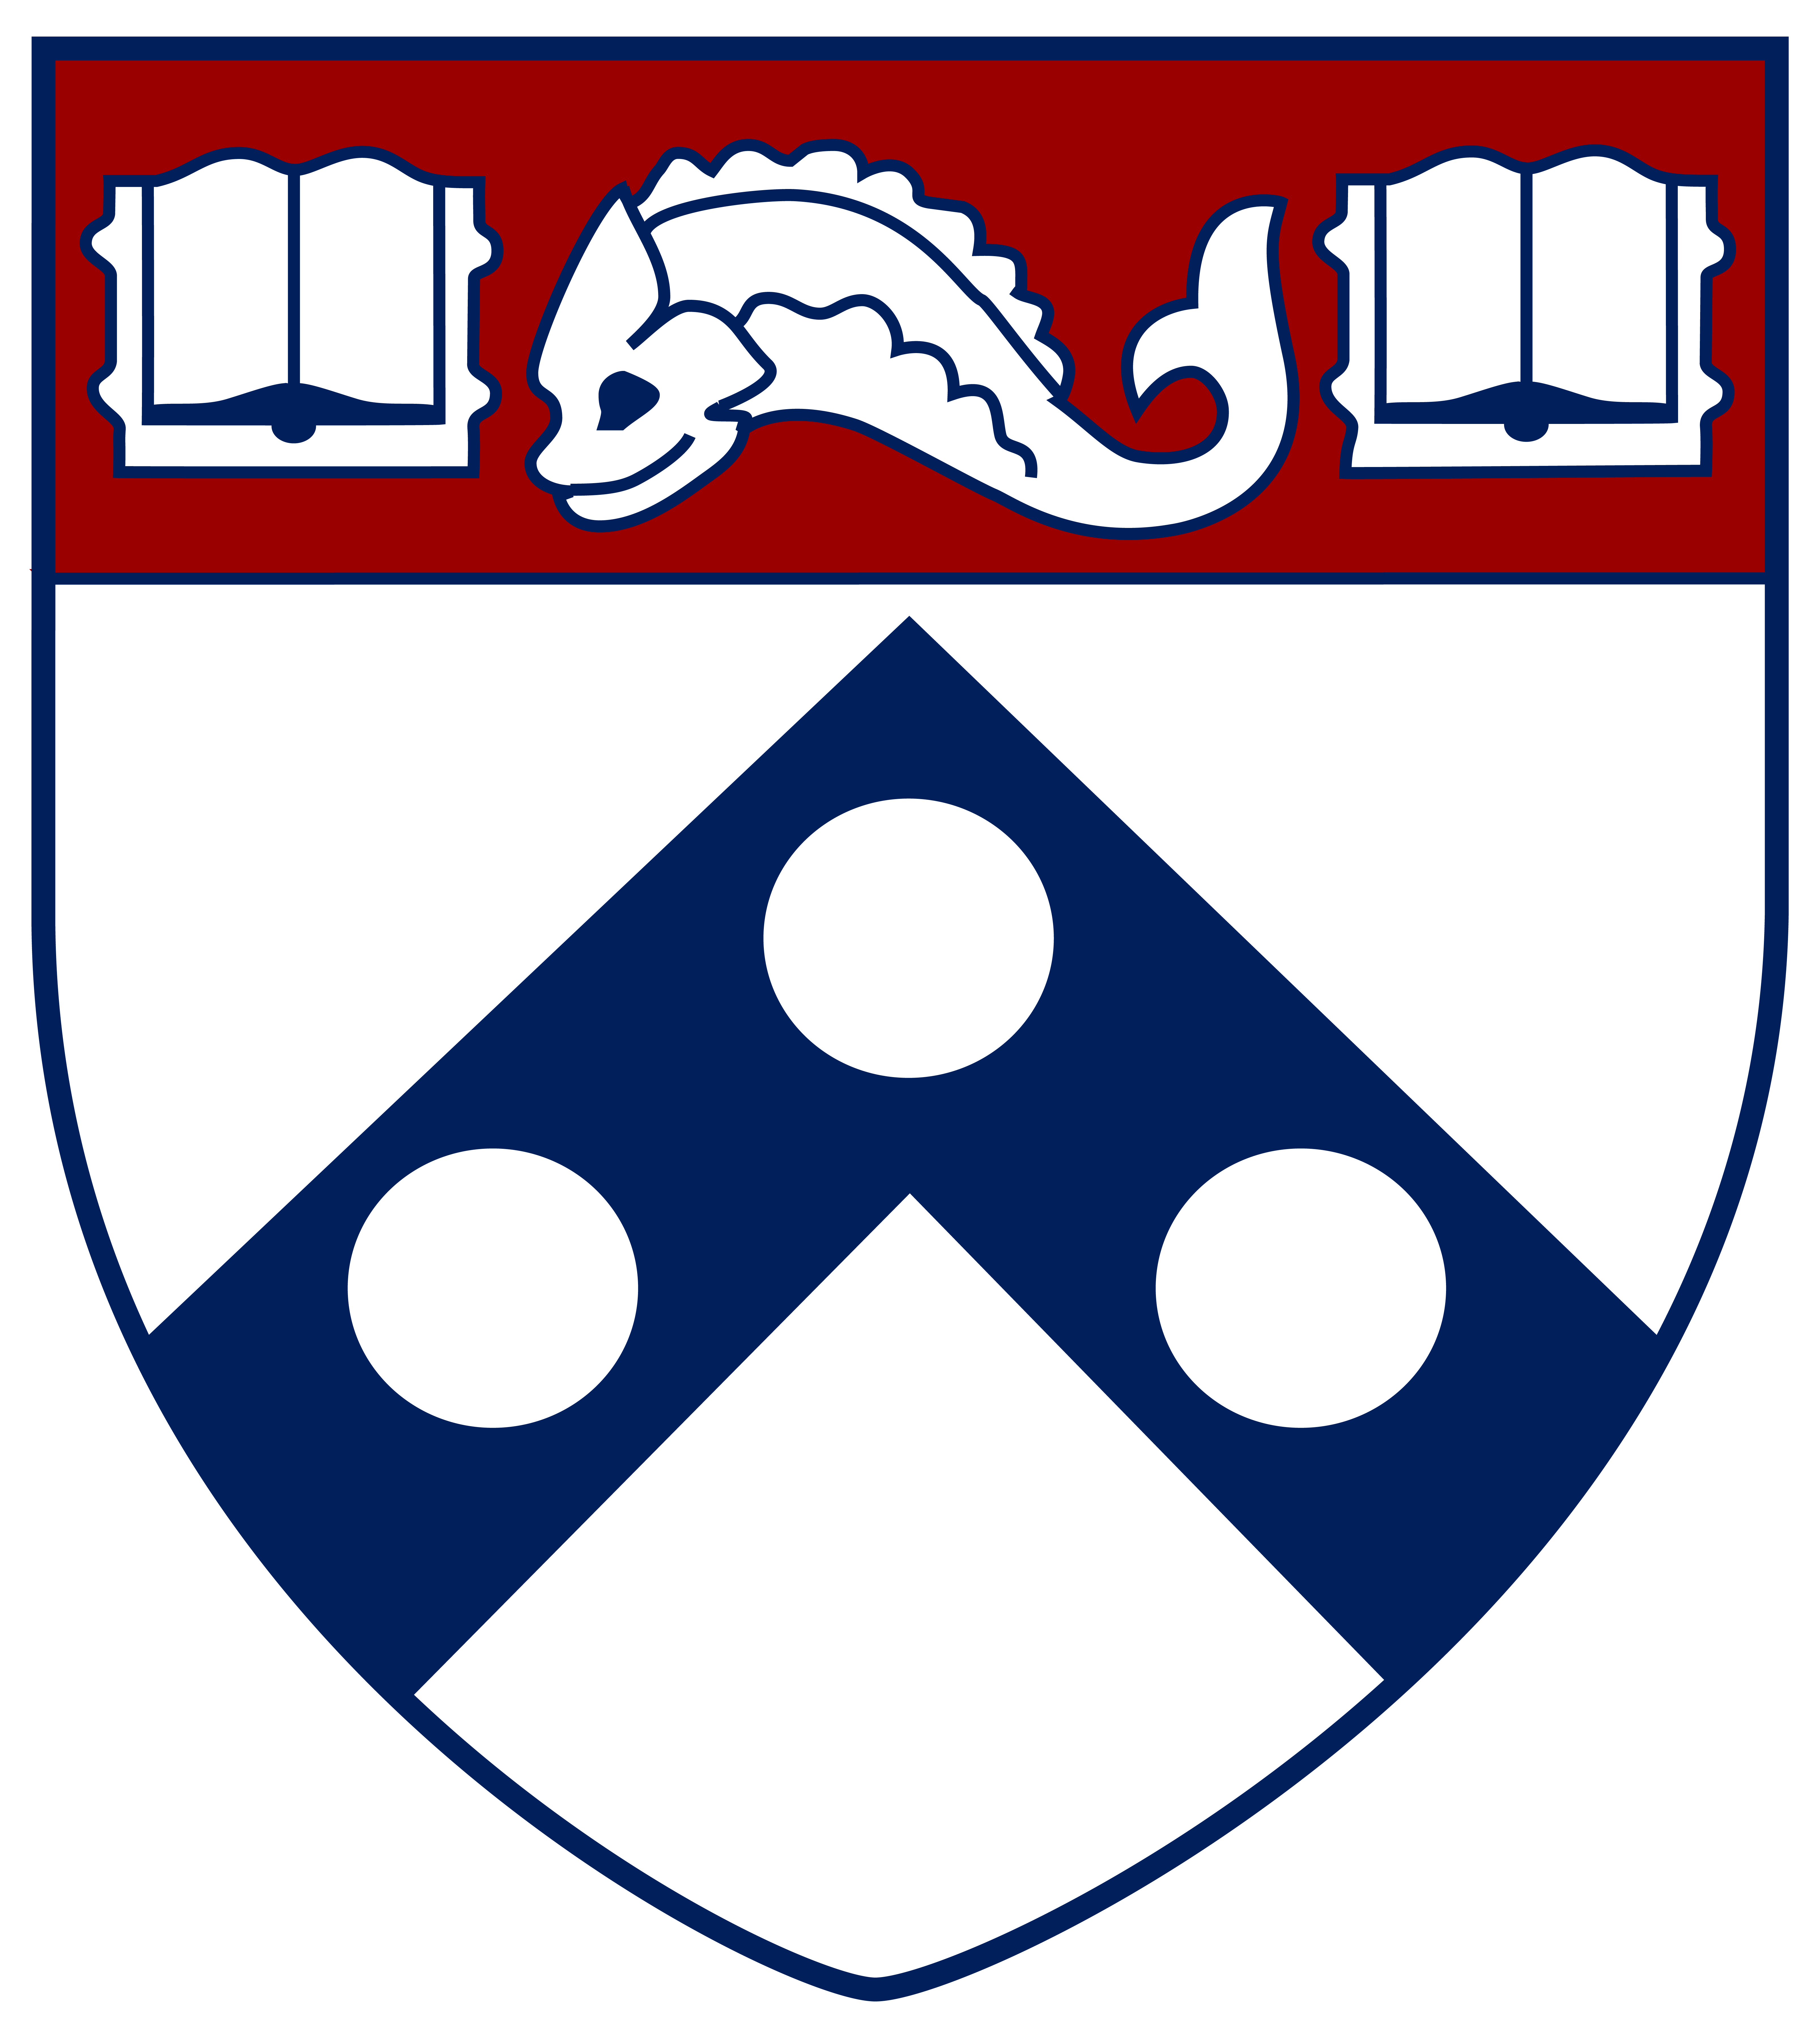 Penn shield logo in maroon, blue, and white.